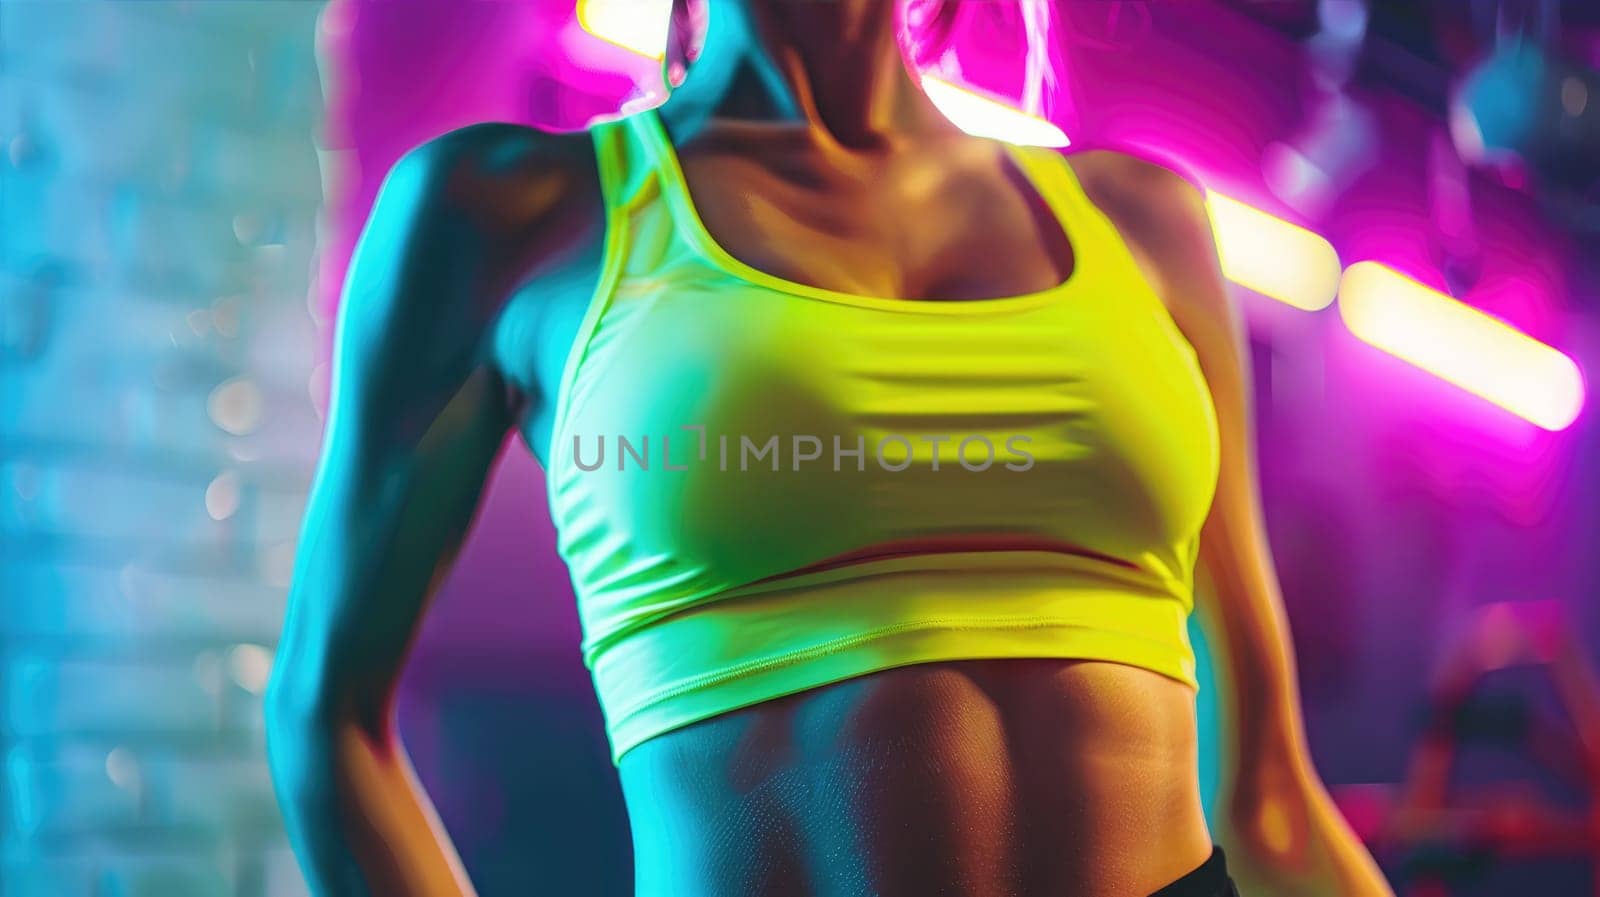 Abdominal muscles of fit fitness woman in neon top AI